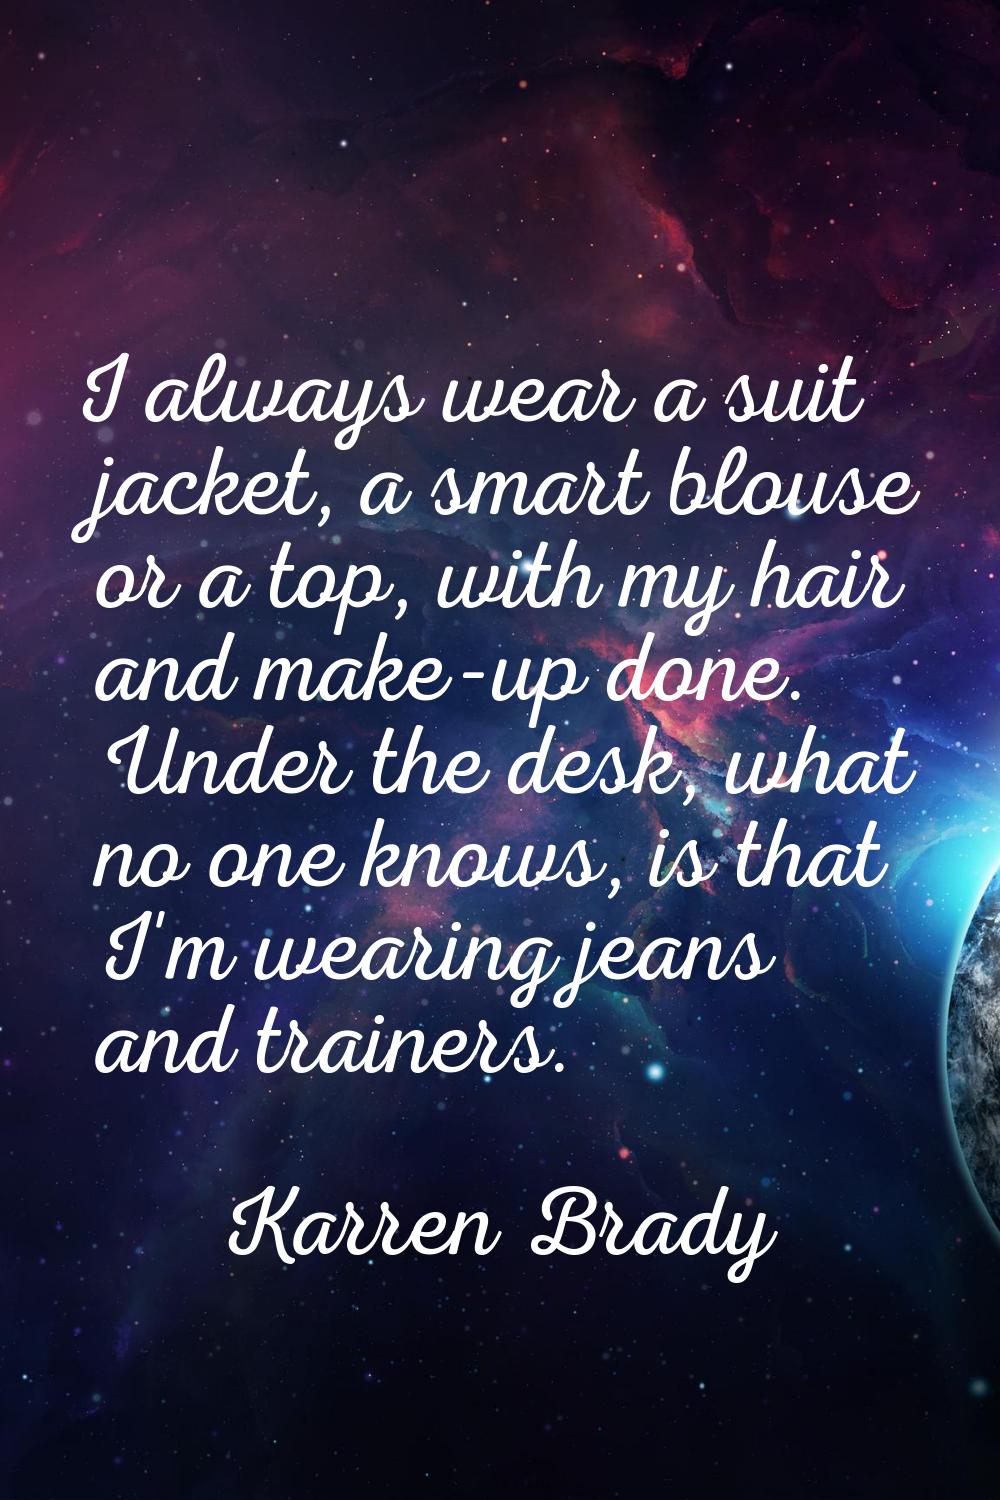 I always wear a suit jacket, a smart blouse or a top, with my hair and make-up done. Under the desk